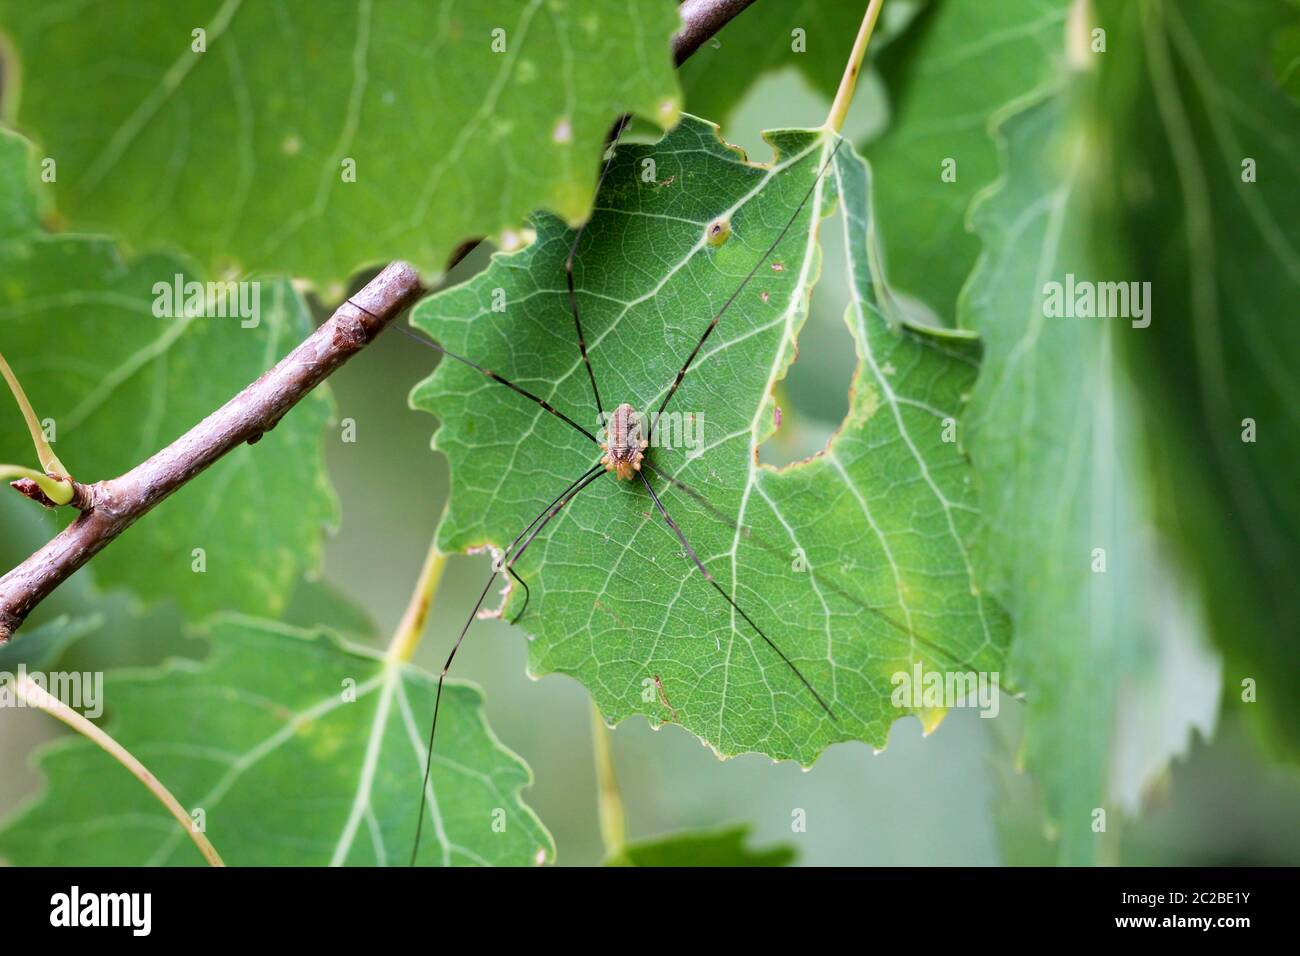 Details of a spider, spider on a plant, spider in the web Stock Photo